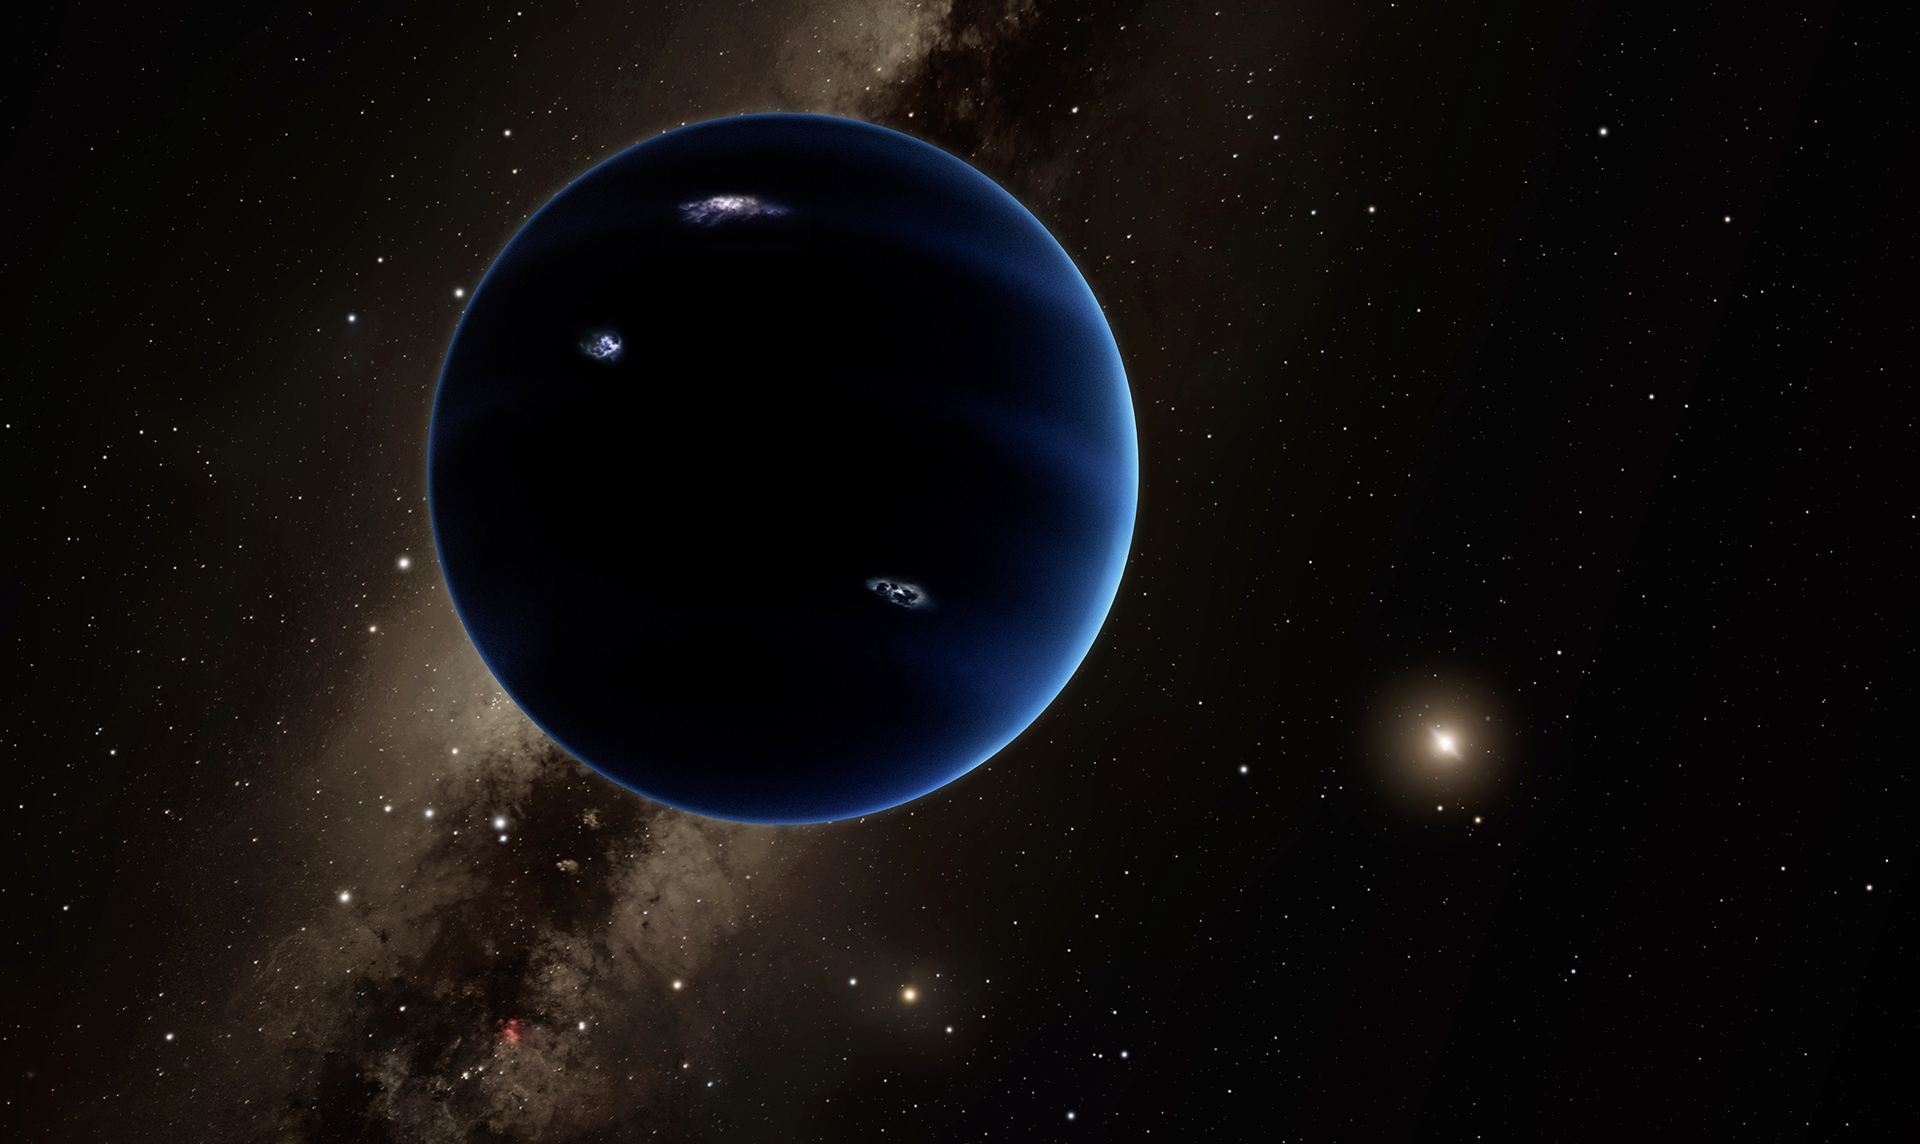 A possible super-Earth/mini-Neptune world hundreds of times more distant than Earth is from the Sun. Image credit: R. Hurt / Caltech (IPAC)